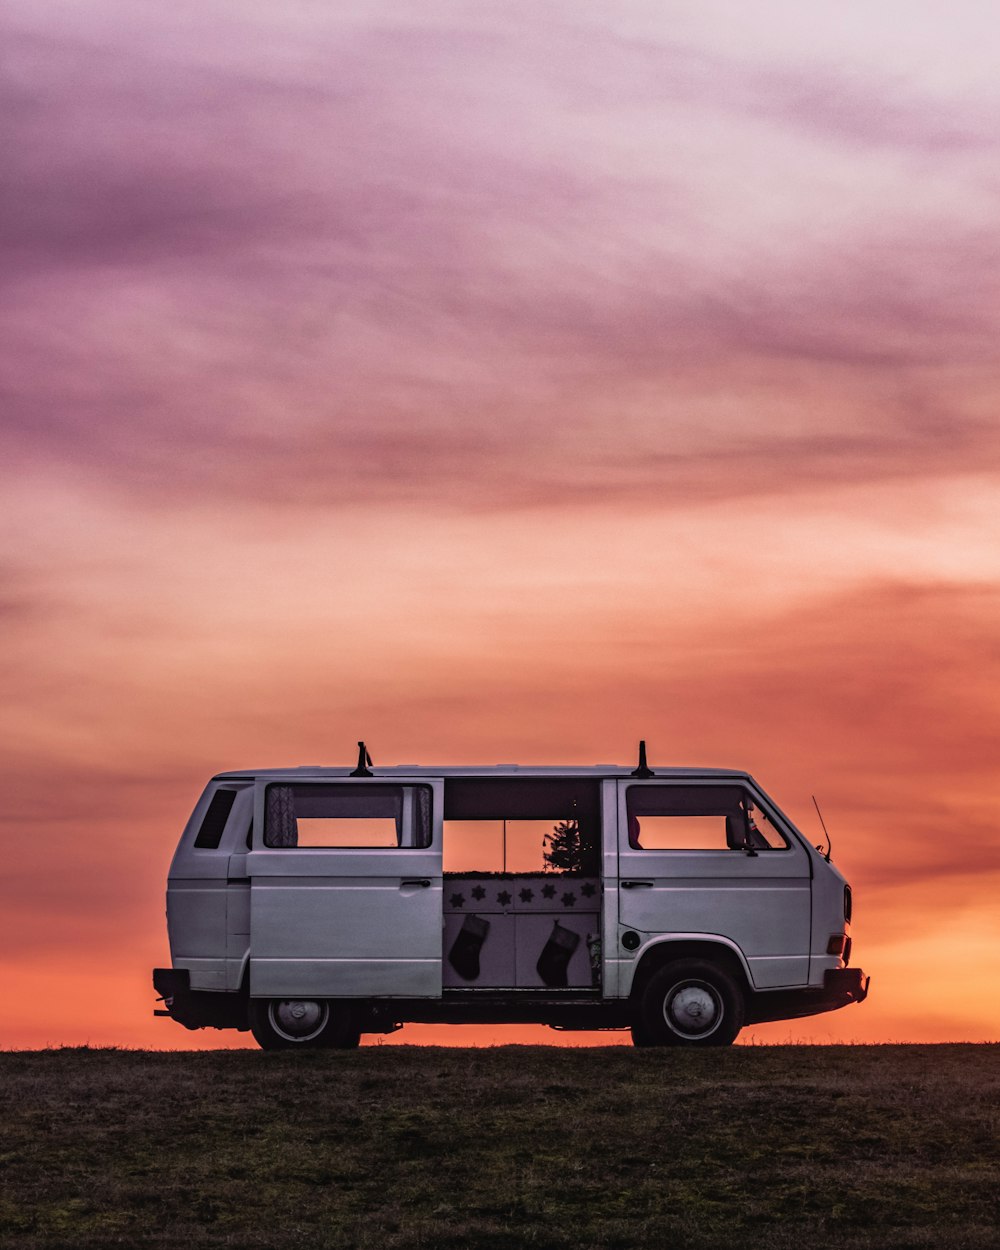 a van parked in a field with a sunset in the background